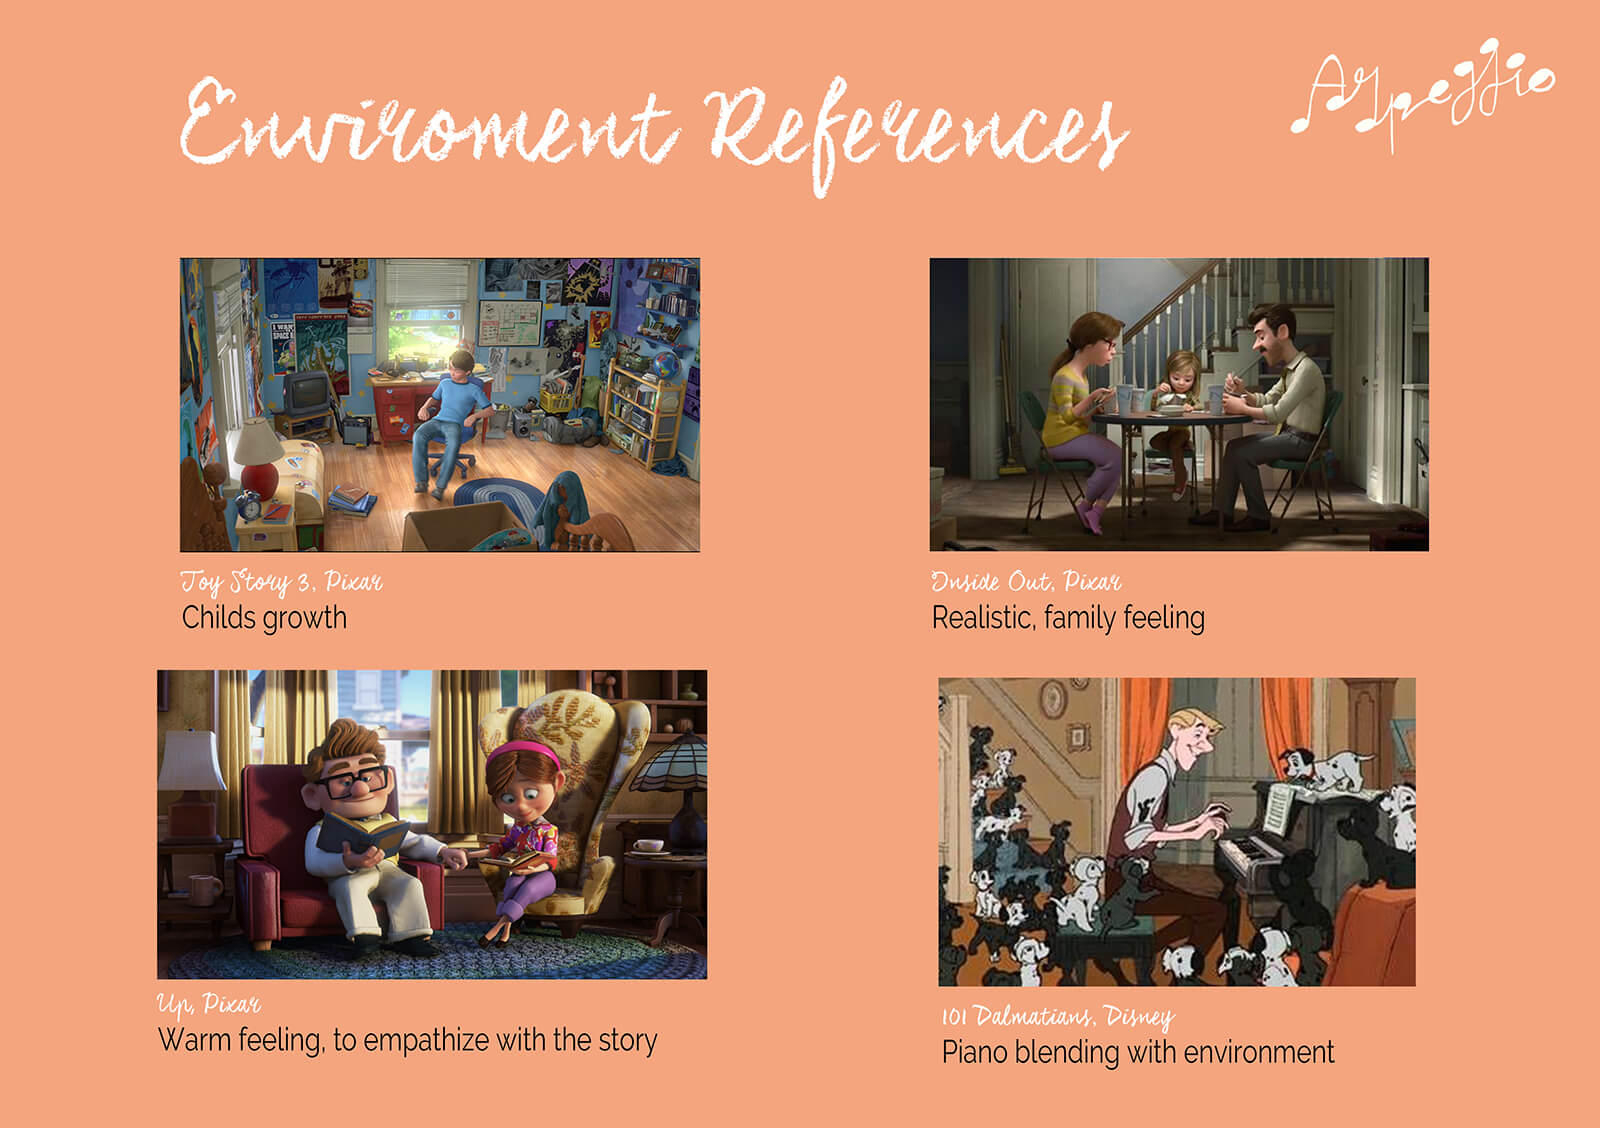 Environmental references for the film Arpeggio, including images from Toy Story 3, Inside Out, Up, and 101 Dalmatians